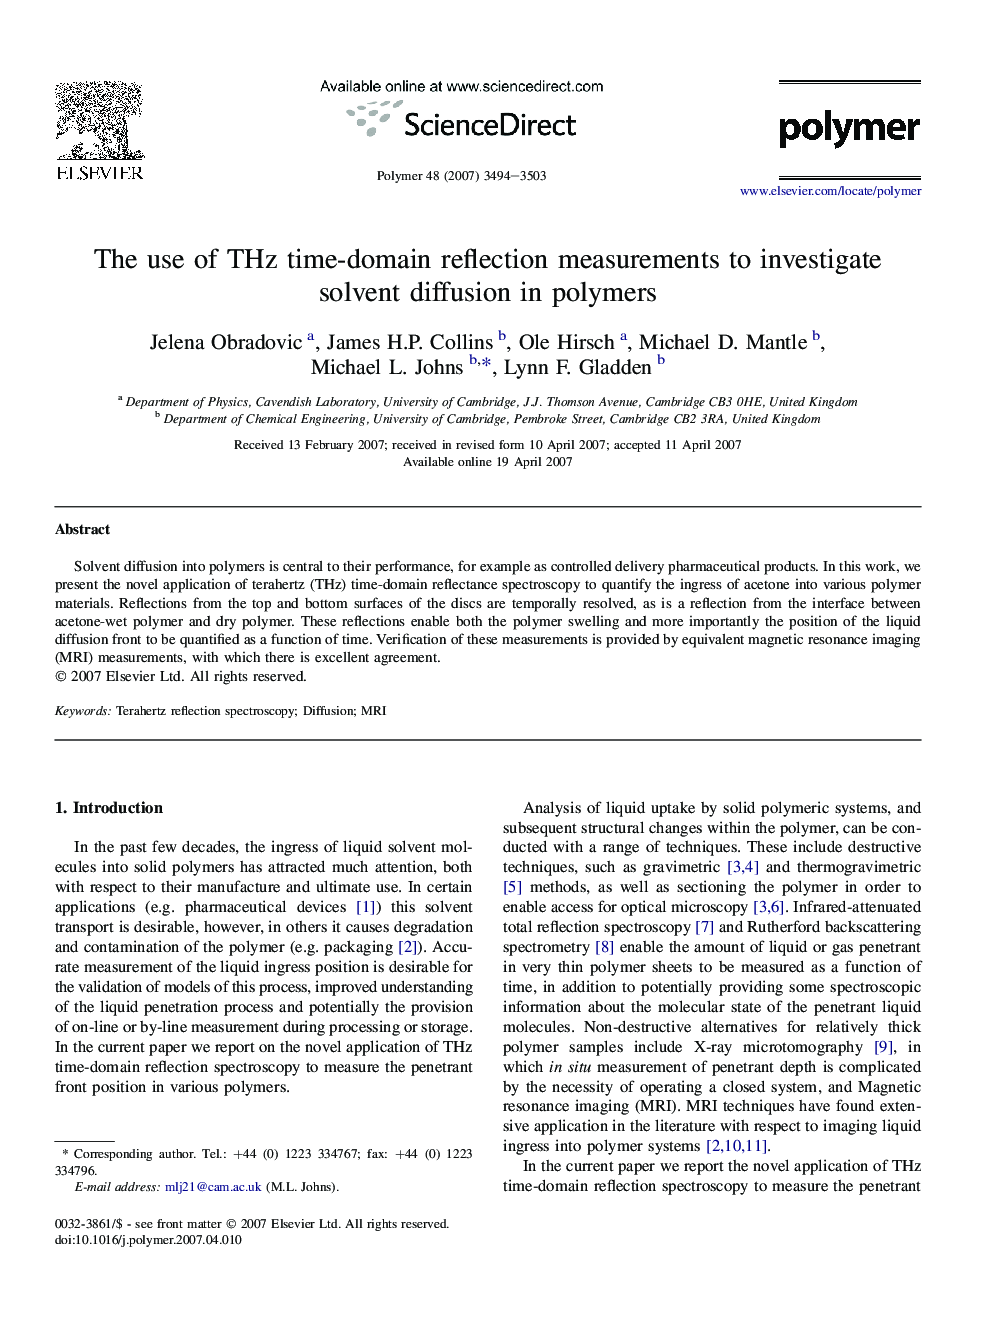 The use of THz time-domain reflection measurements to investigate solvent diffusion in polymers